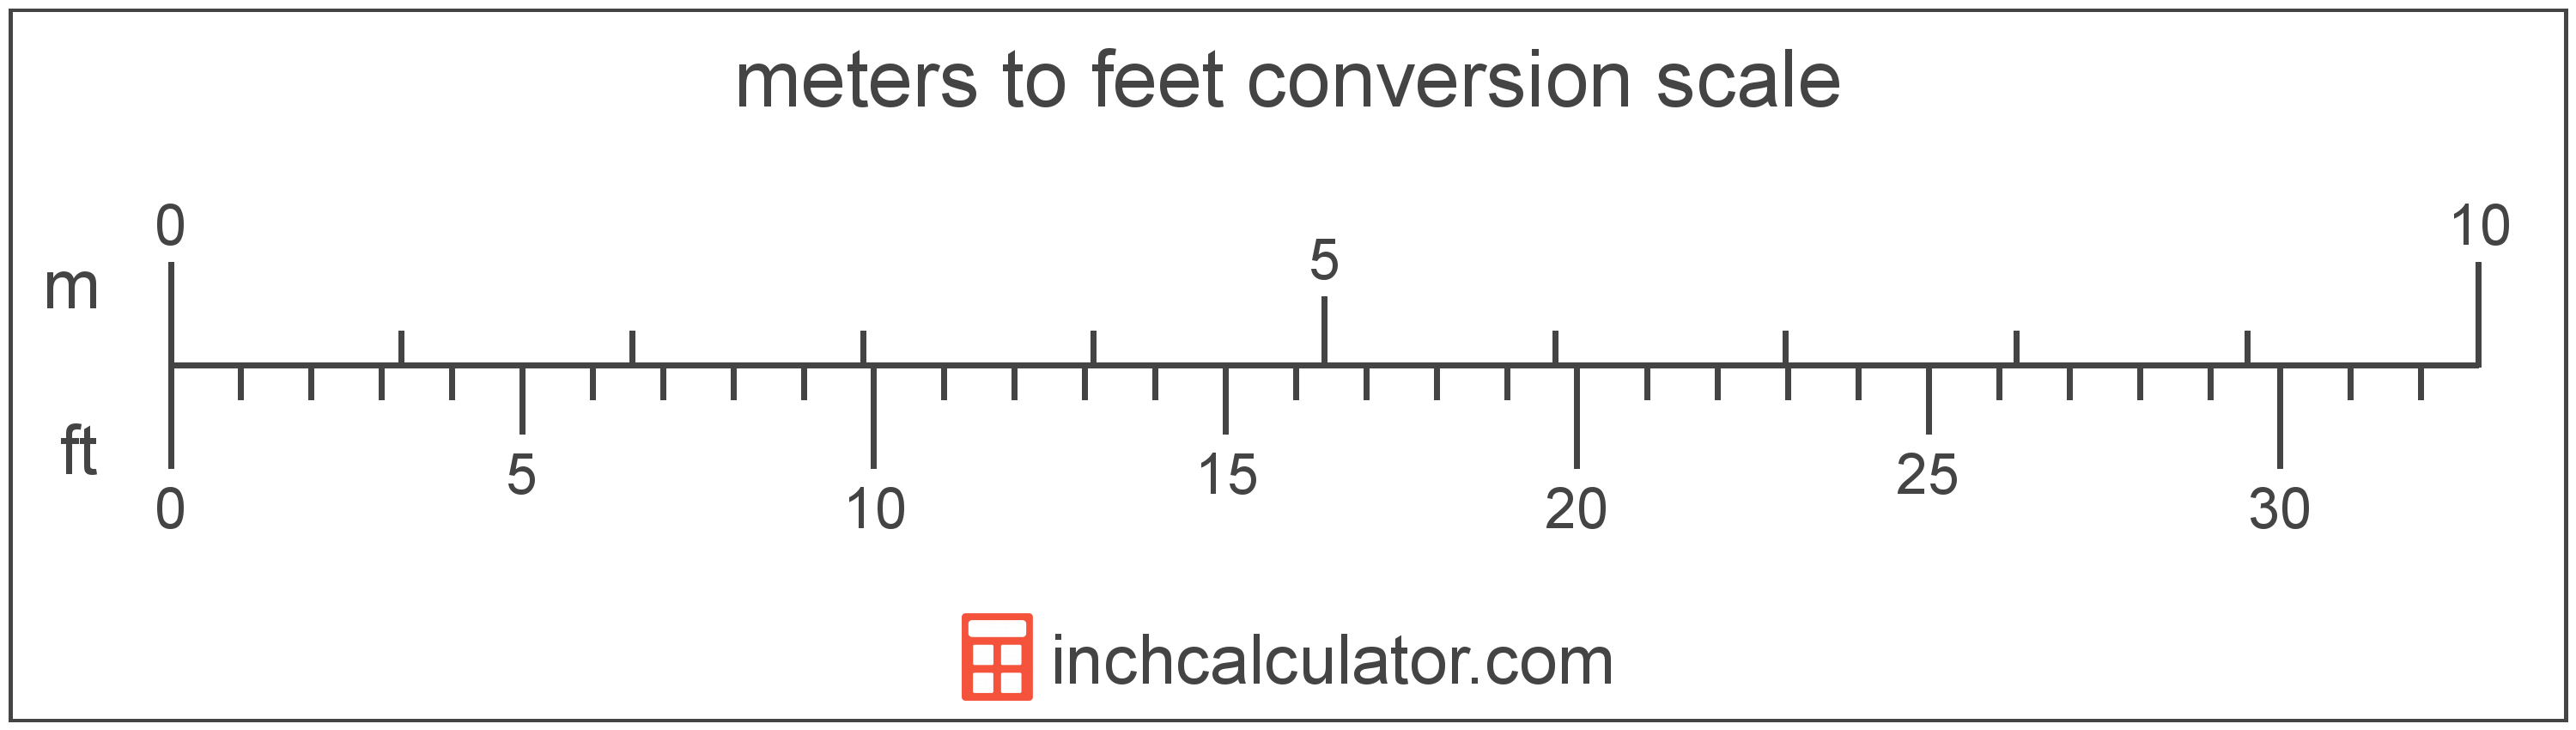 Meter To Foot Conversion Scale 